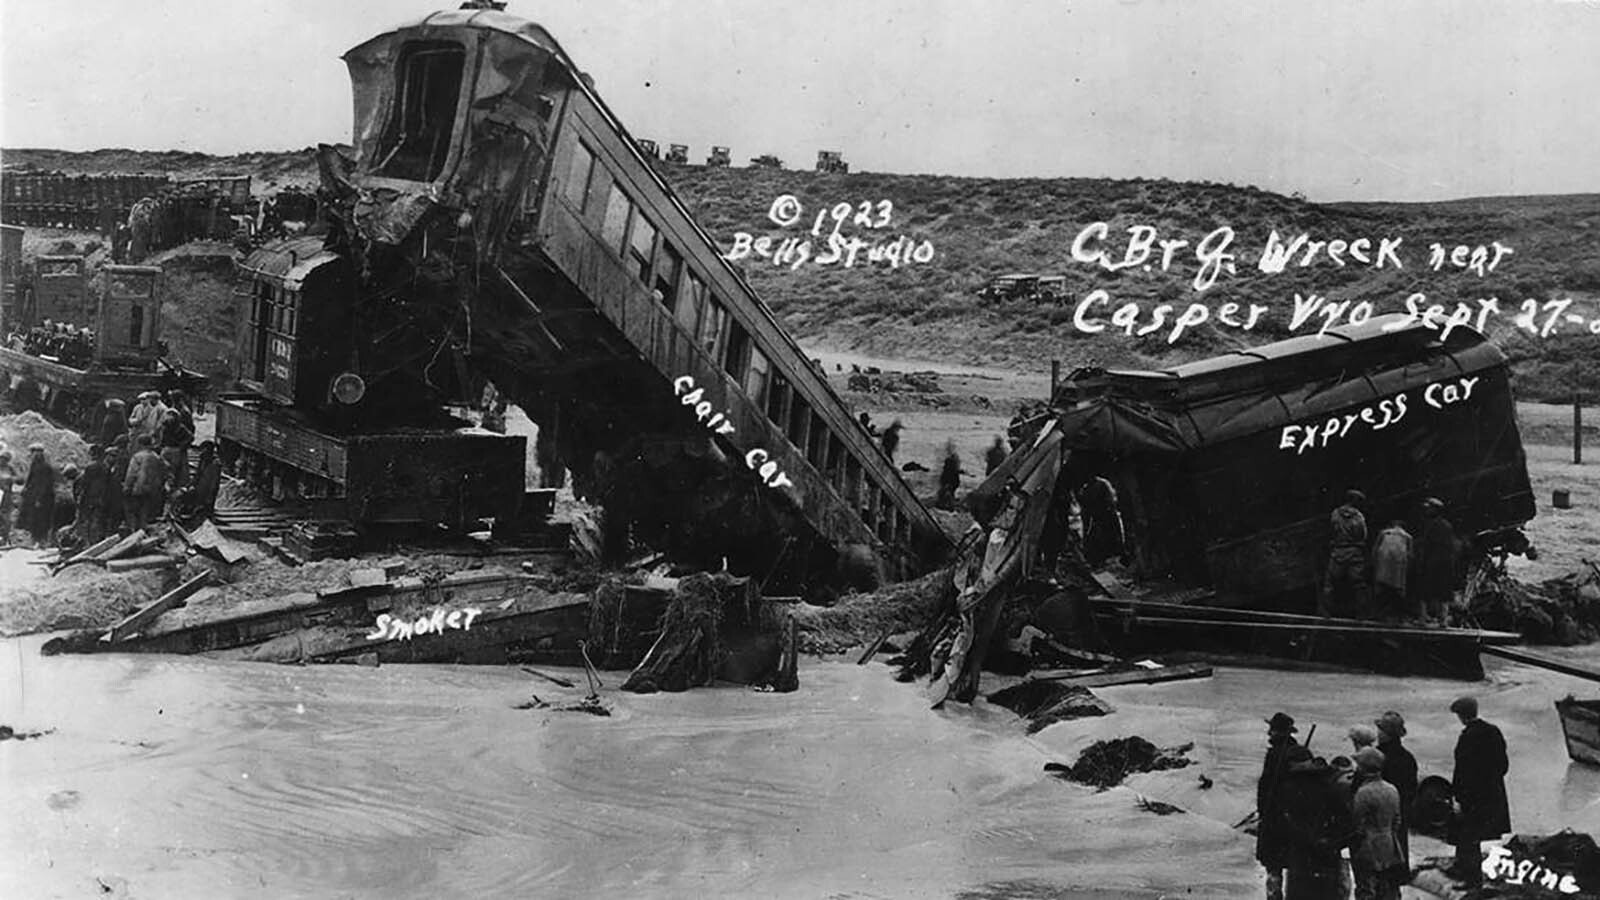 The Cole Creek train disaster was the worst in Wyoming’s history. The engine can bee seen on its side at lower right.